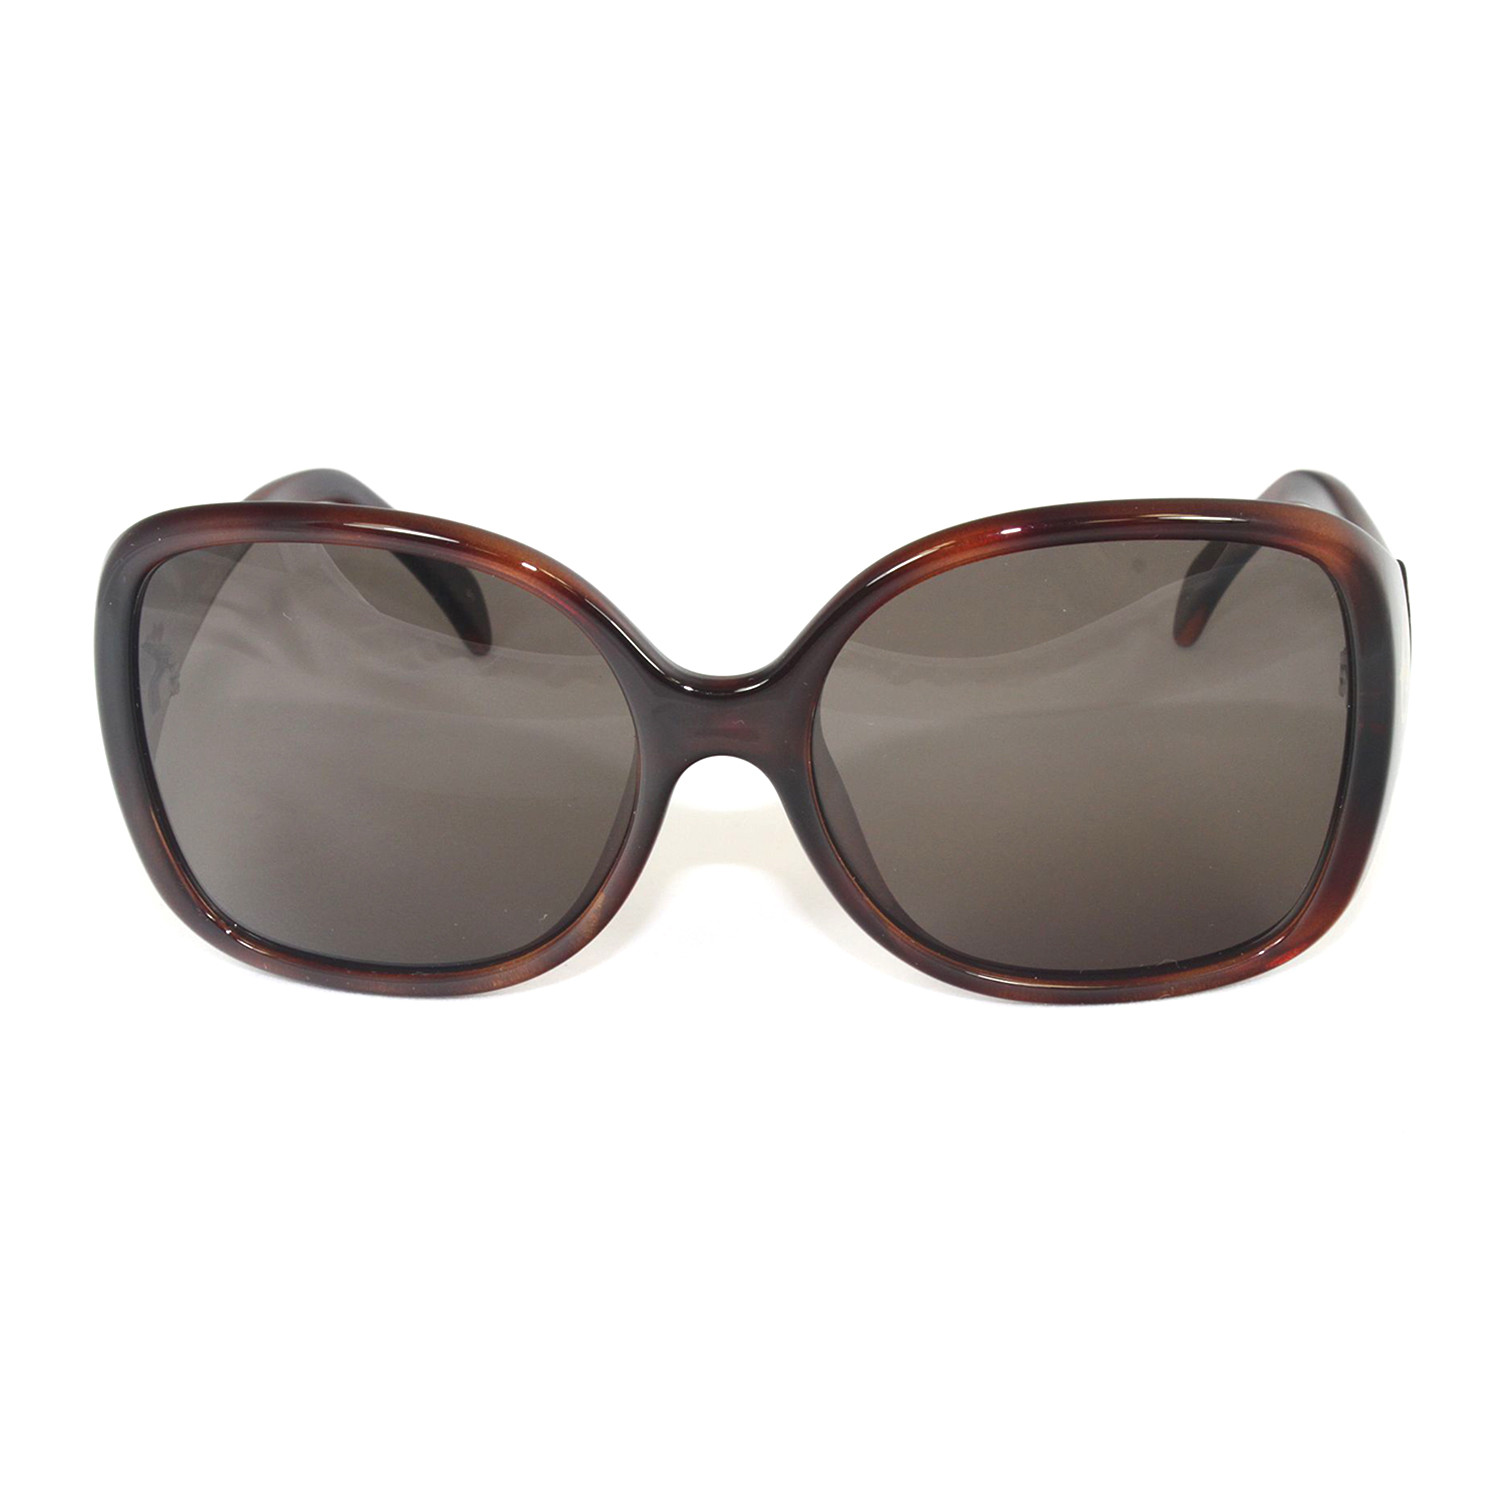 EP673S-215 Sunglasses // Tortoise - Emilio Pucci - Touch of Modern